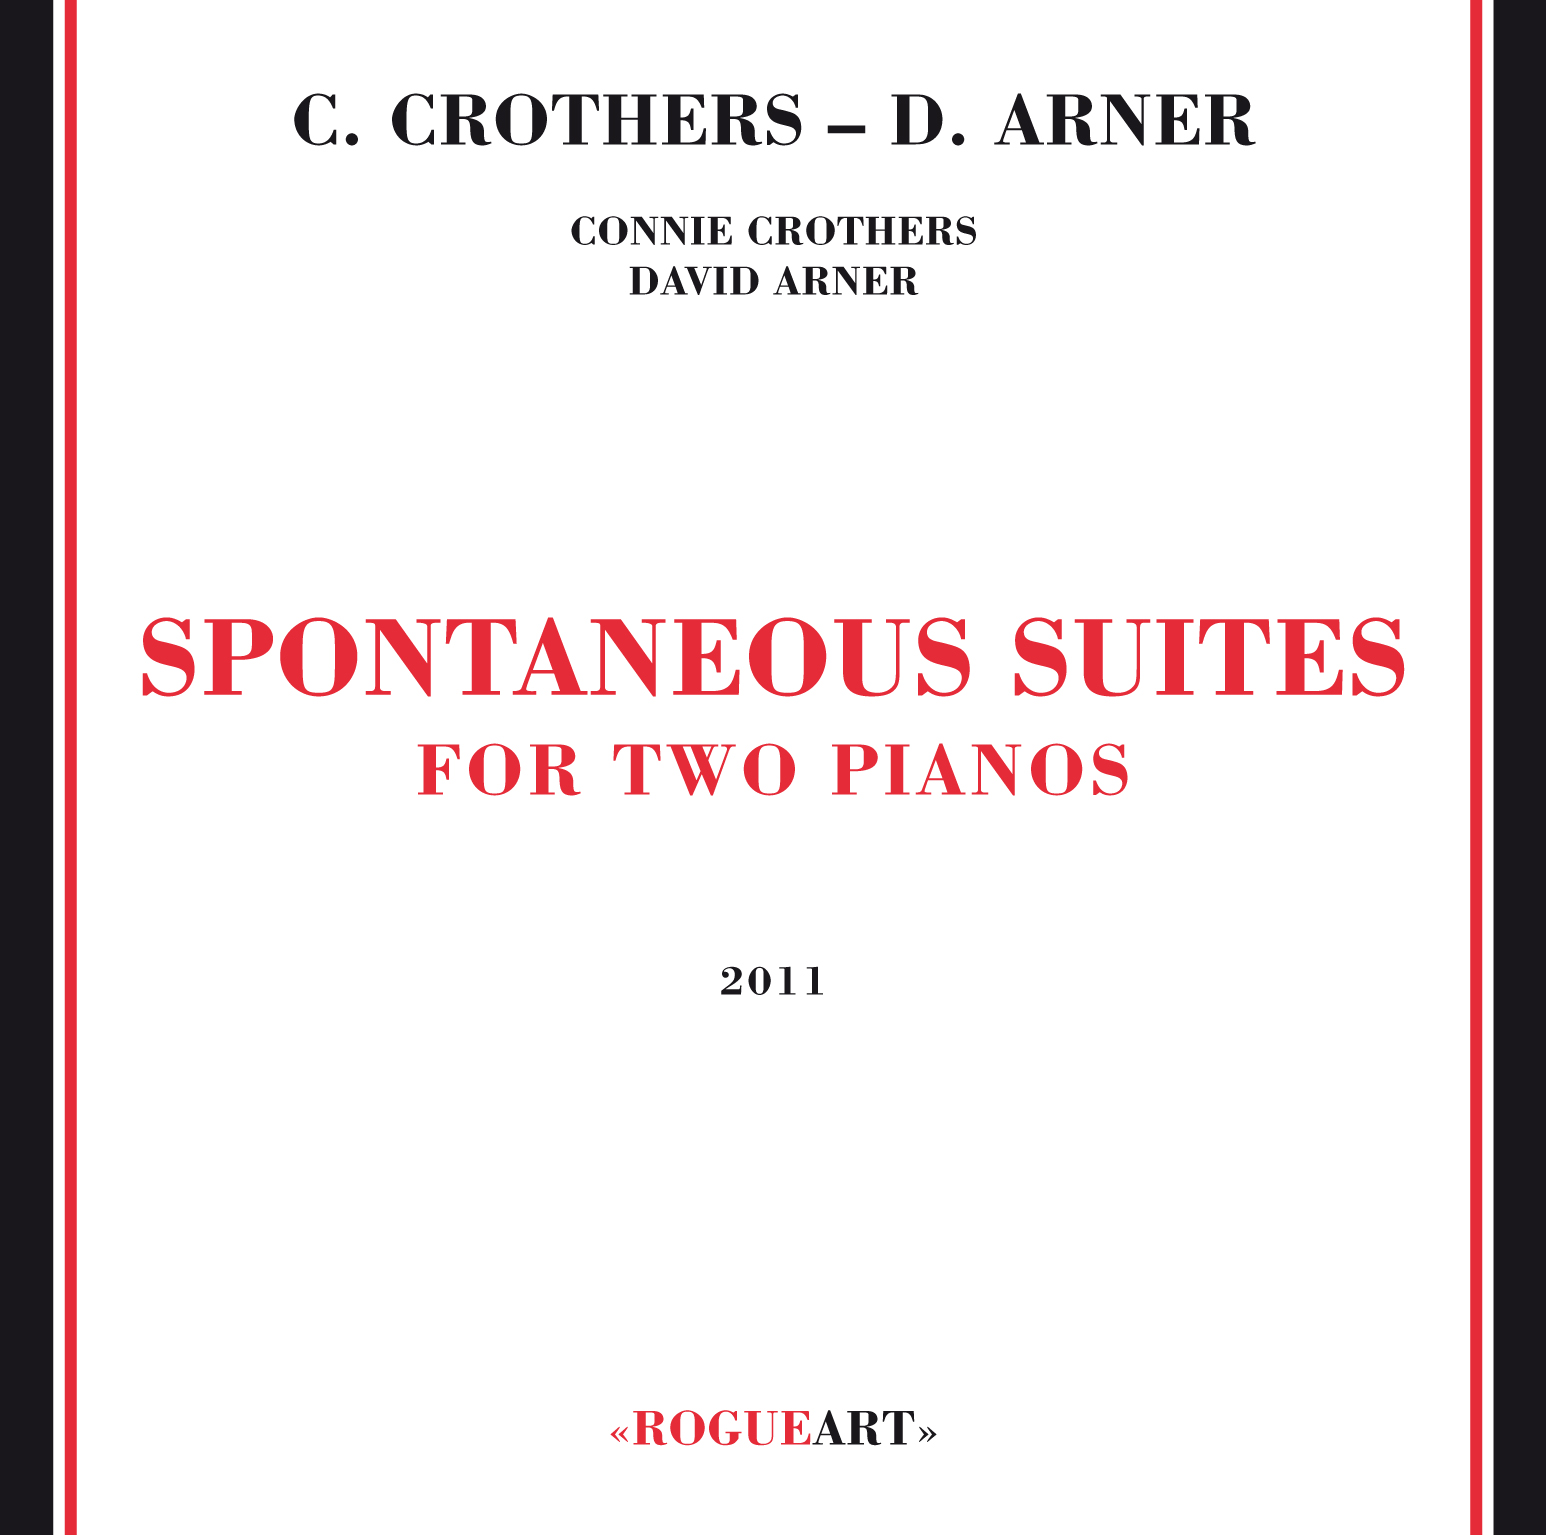 Spontaneous Suites for two pianos